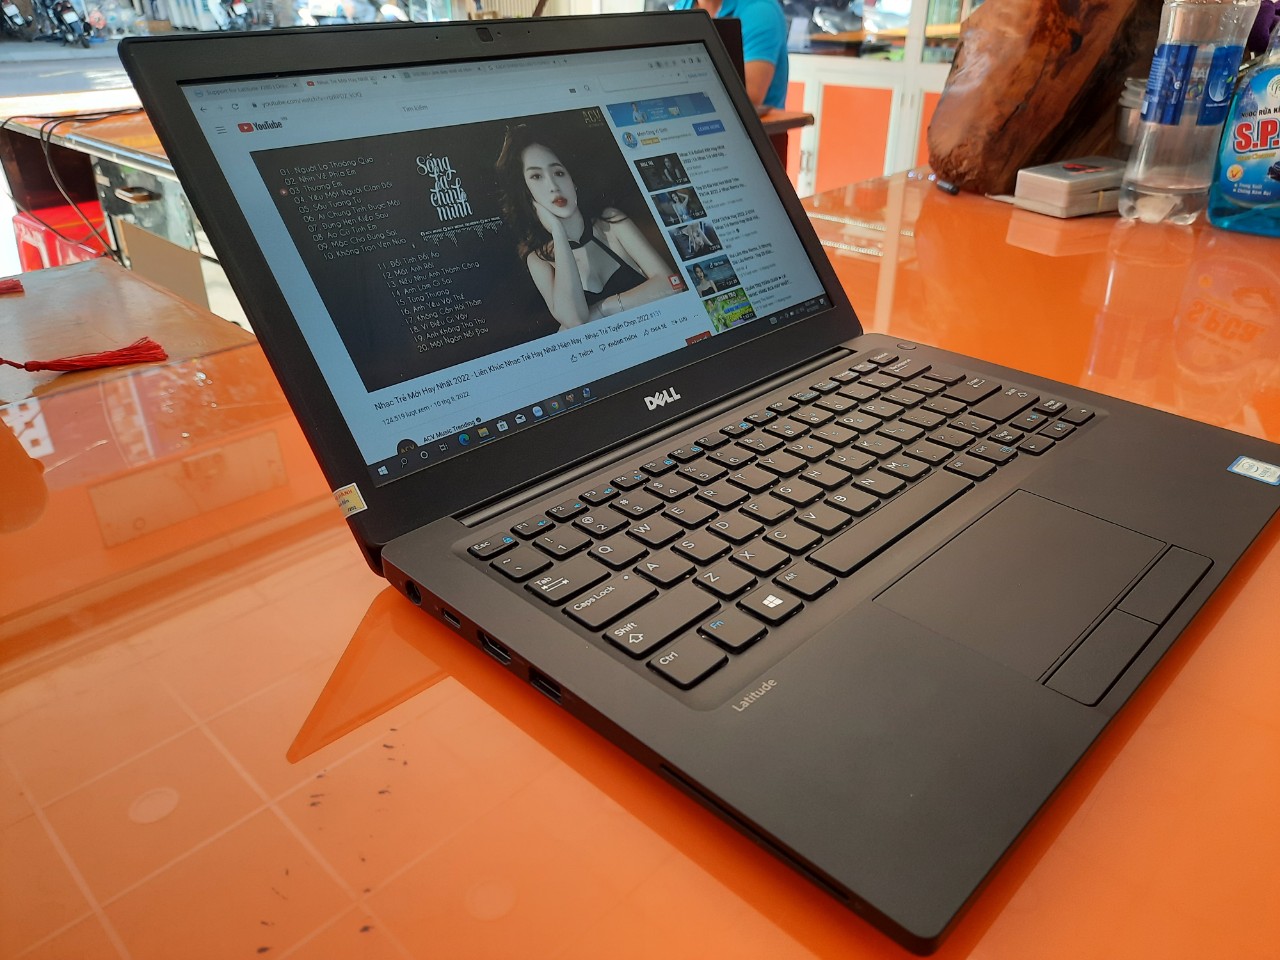 dell latitude 7280 nhỏ gọn